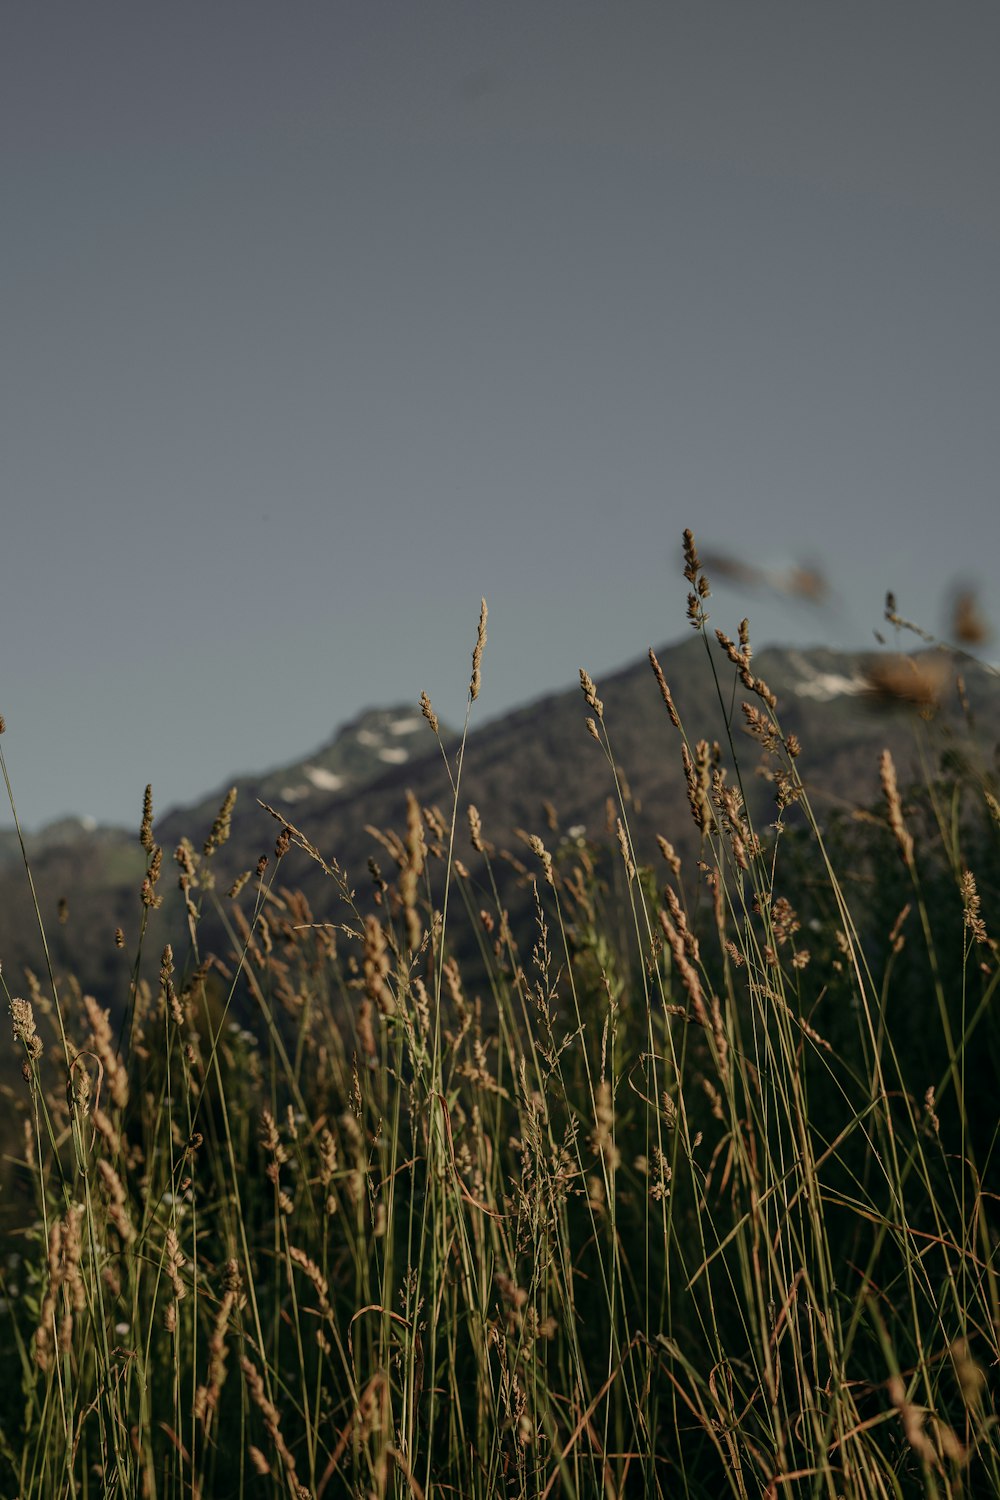 a field of tall grass with a mountain in the background